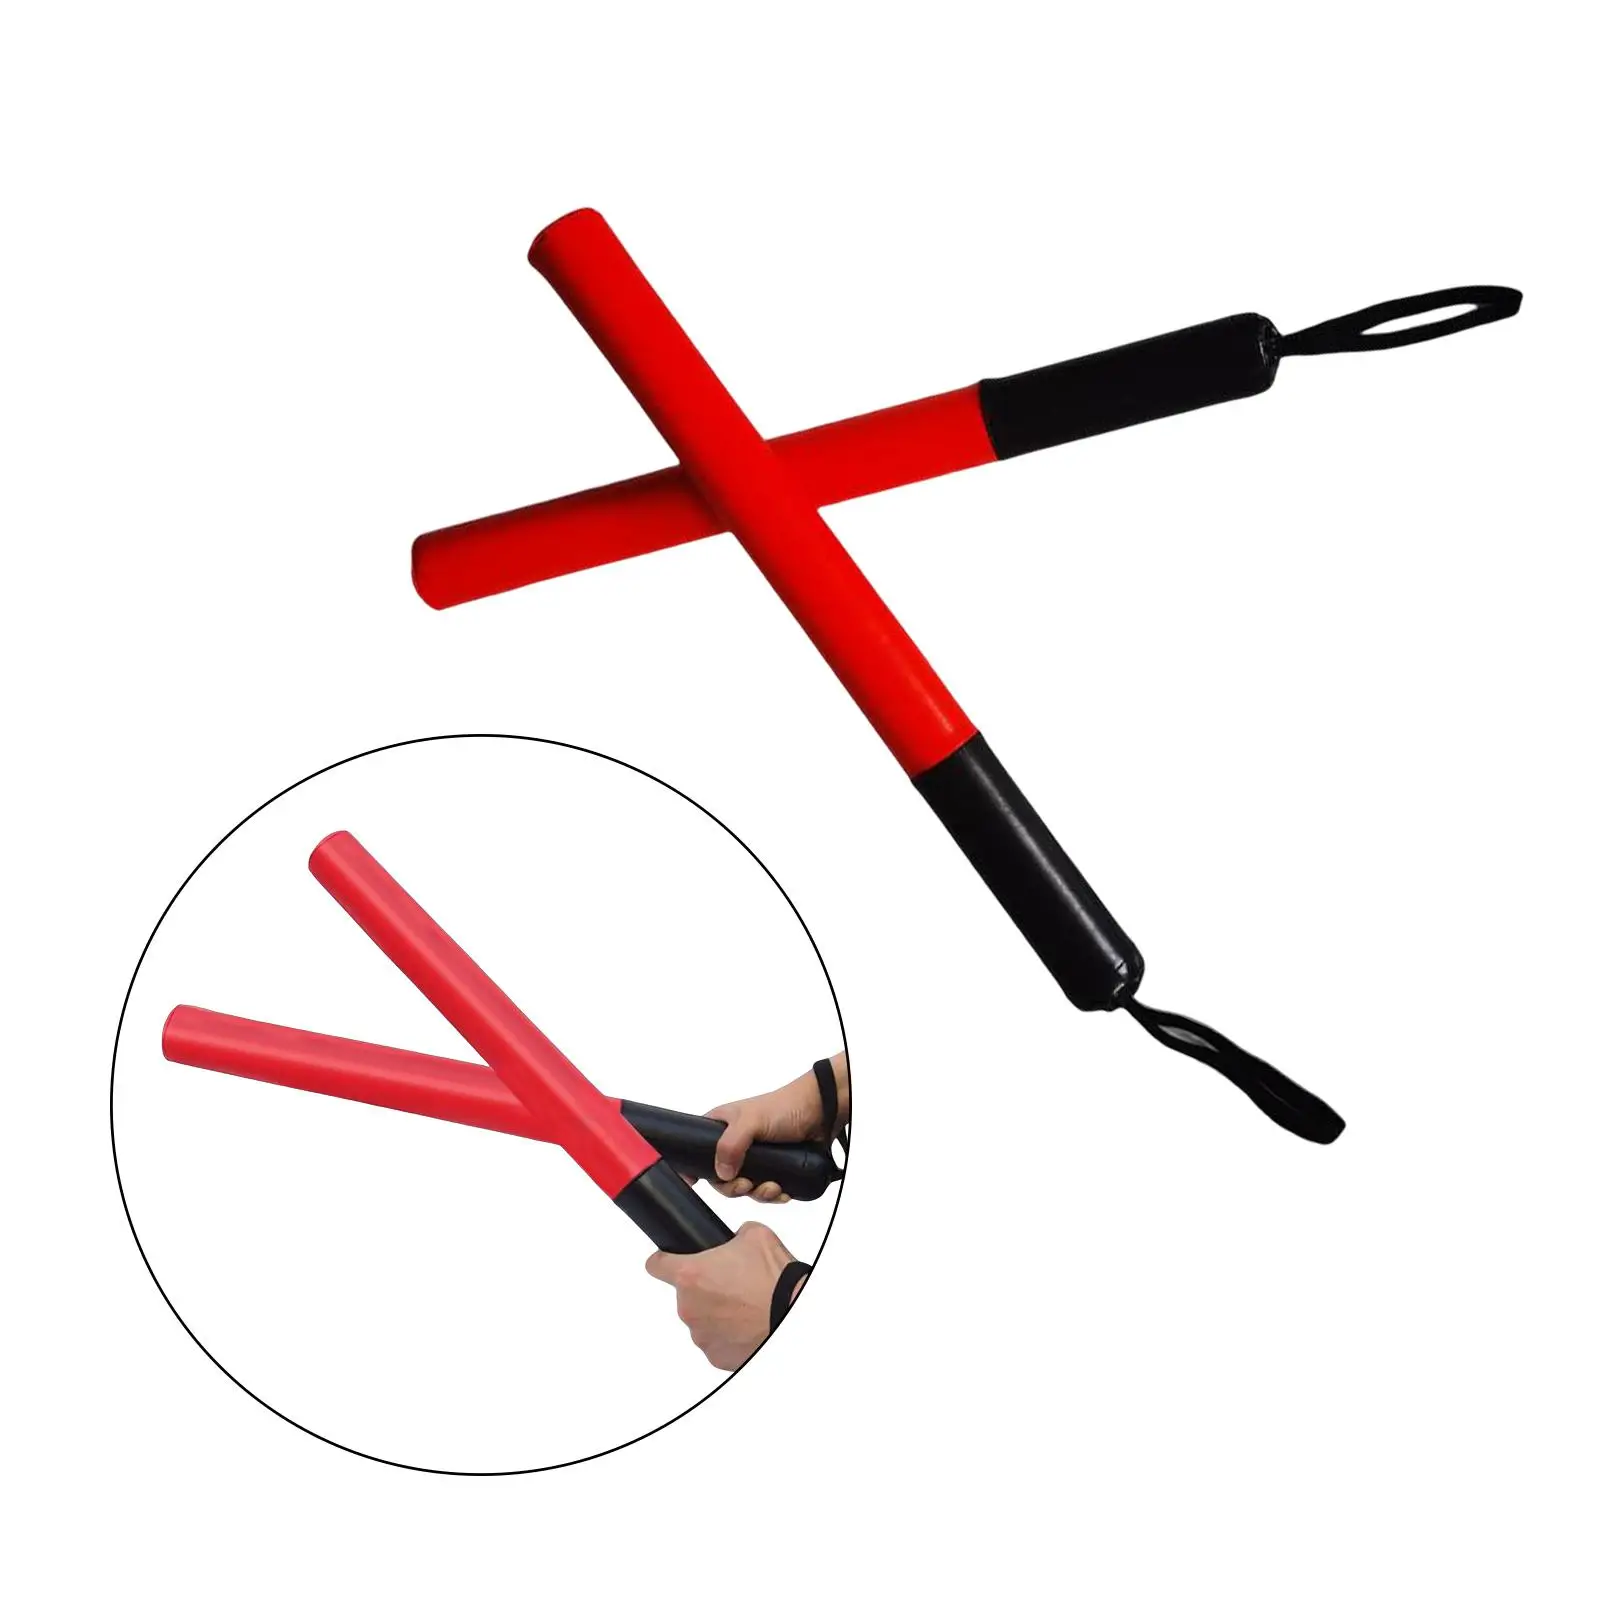 Boxing Training Sticks Padded Contact Sticks PU Leather for Reaction Speed